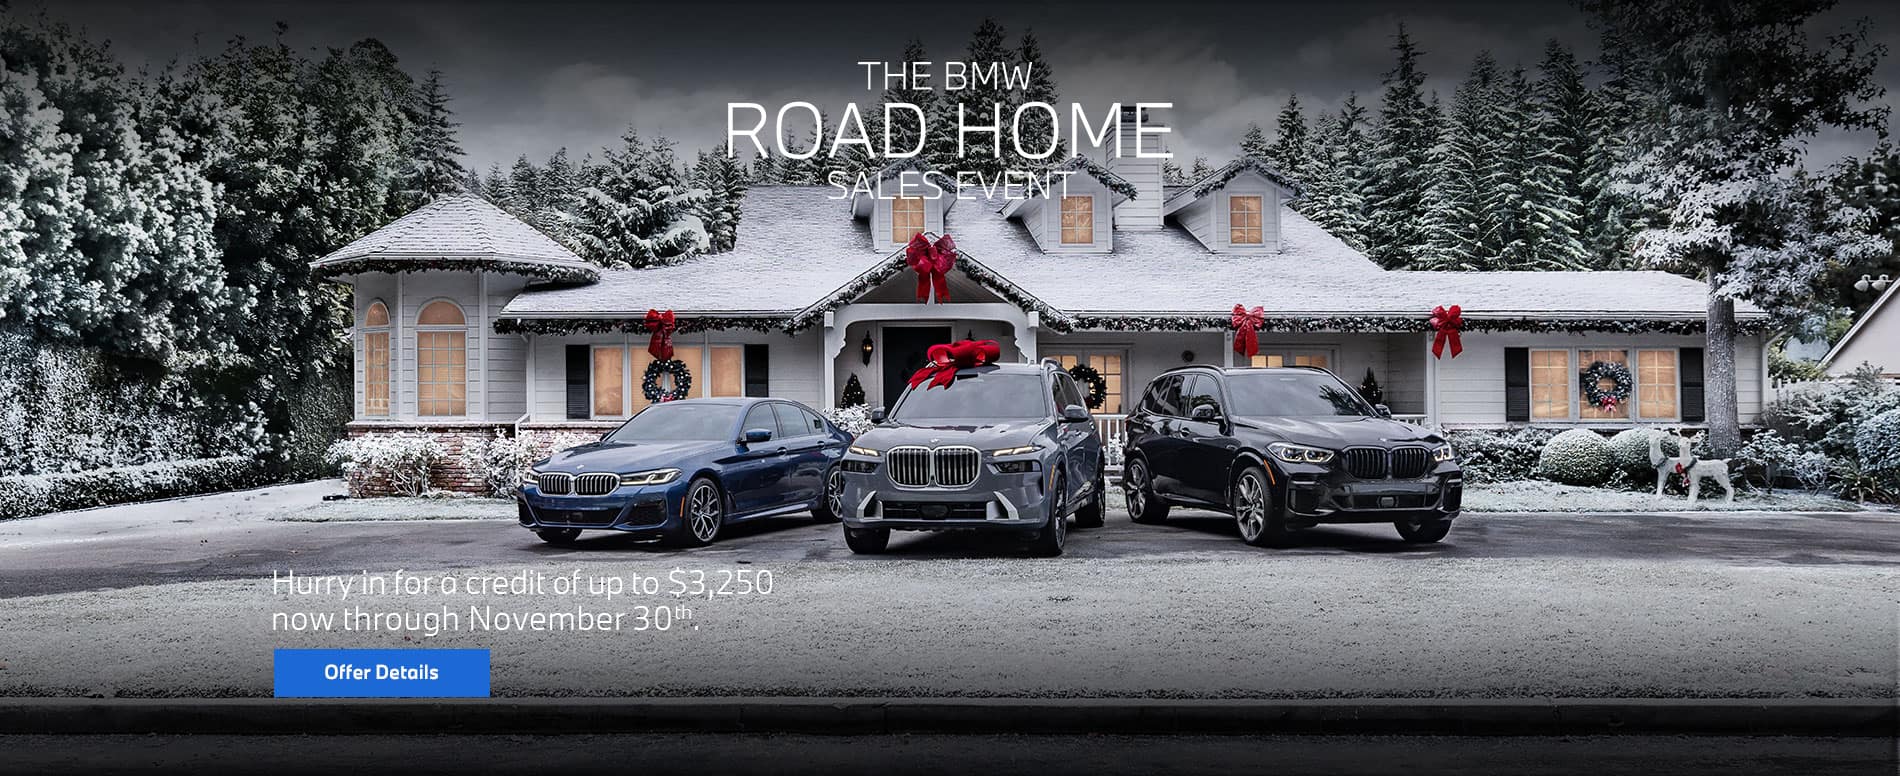 Receive a credit of up to $3,250 on select models now through November 30th.